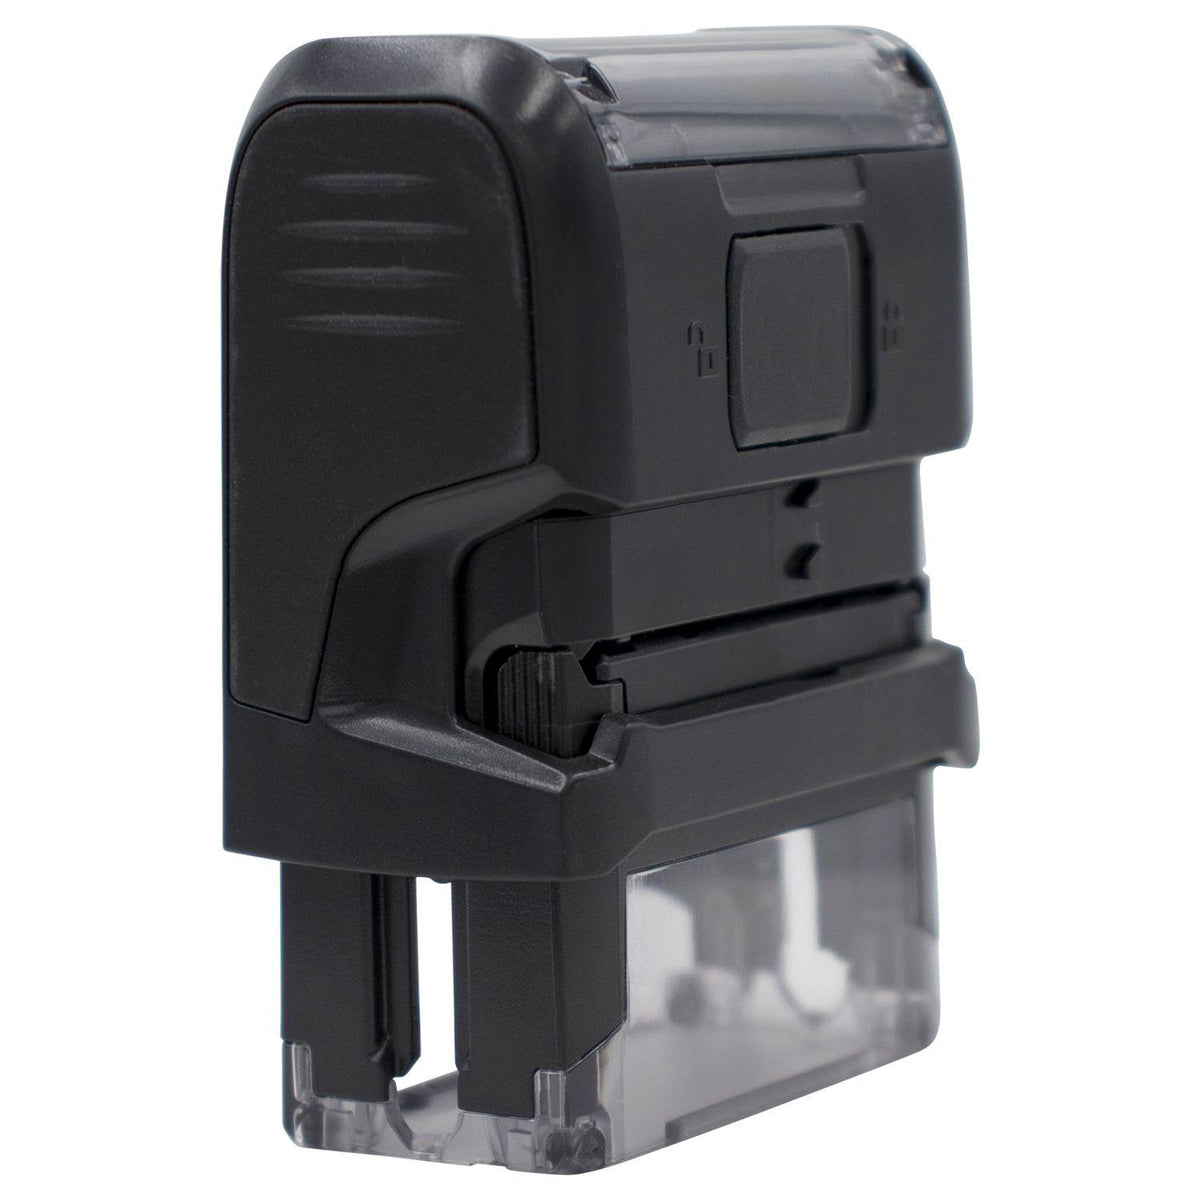 Large Self Inking Read Route Stamp - Engineer Seal Stamps - Brand_Trodat, Impression Size_Large, Stamp Type_Self-Inking Stamp, Type of Use_Professional